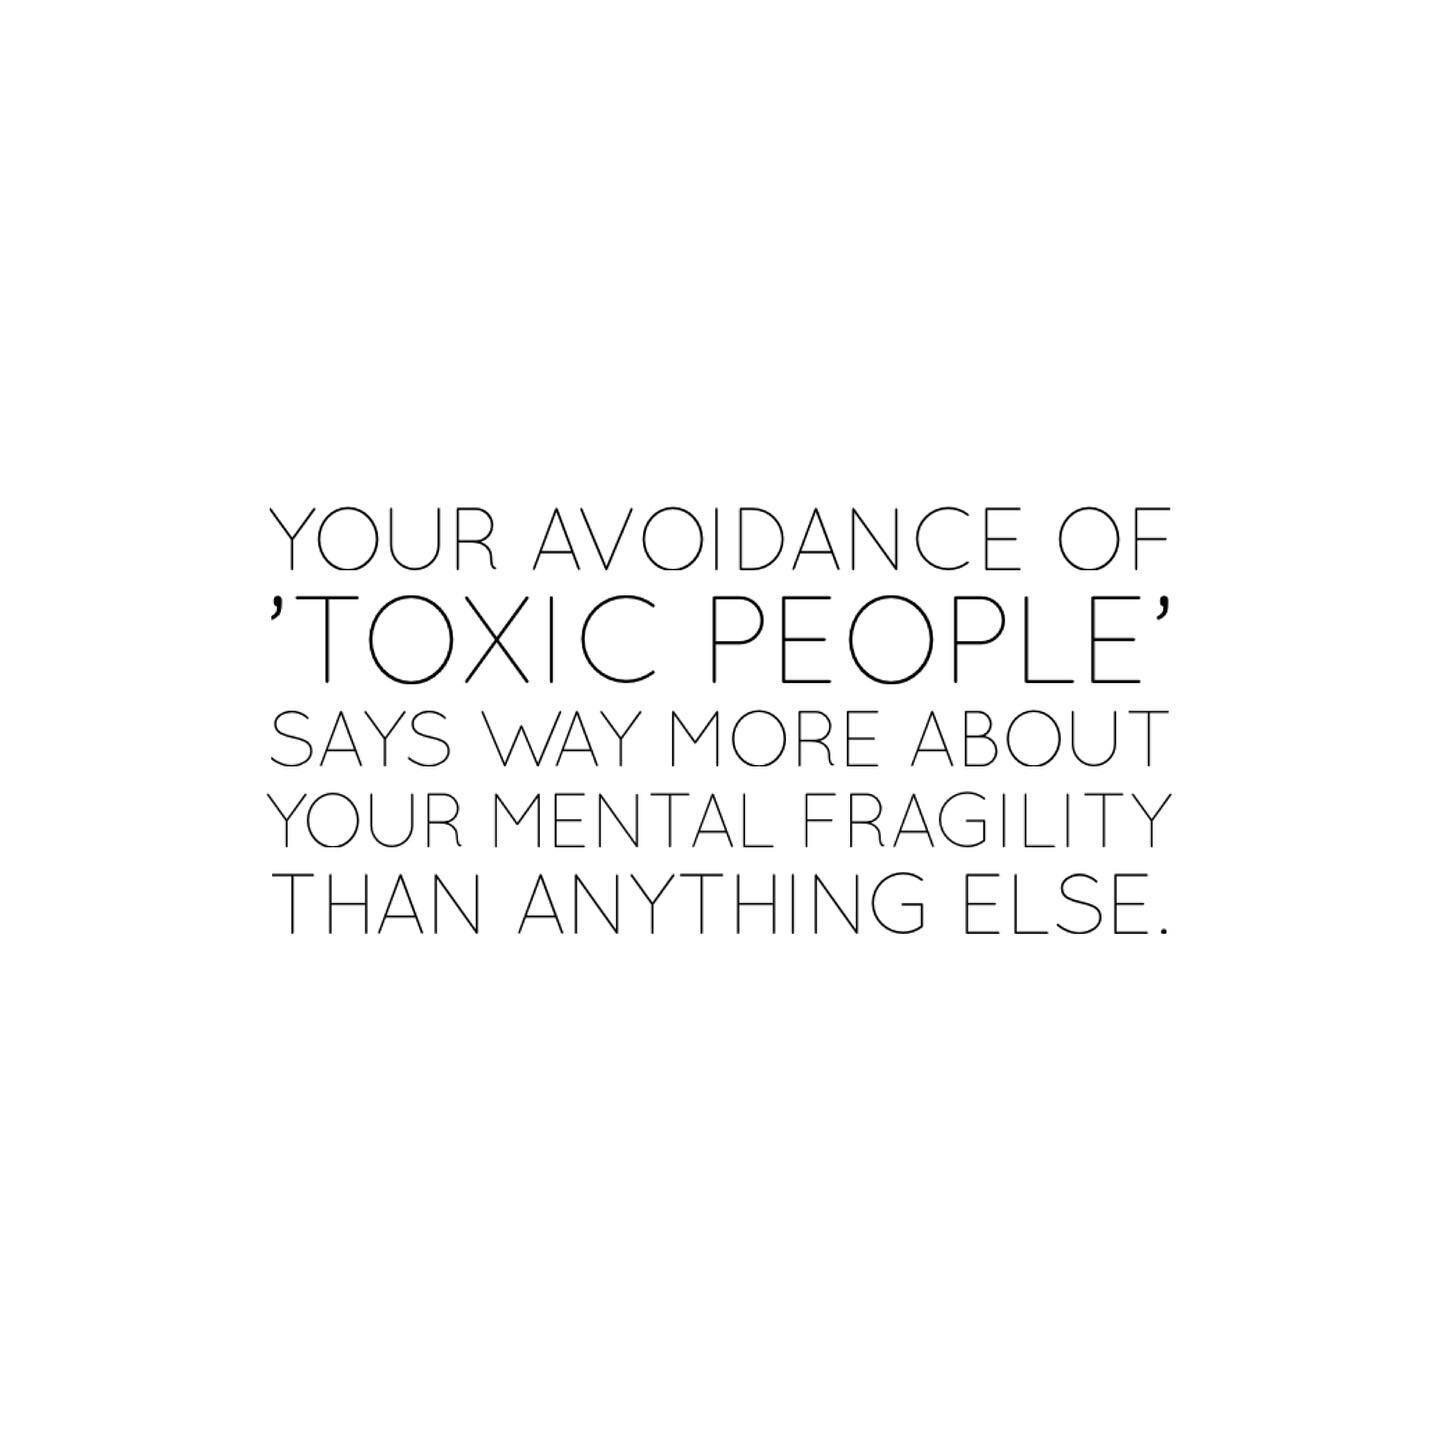 If you constantly have to remove toxic people from your life

1) did you ever try taking responsibility for your thoughts?

2) did you ever try taking responsibility for who you attract?

3) did you ever try looking in the mirror at how you let other